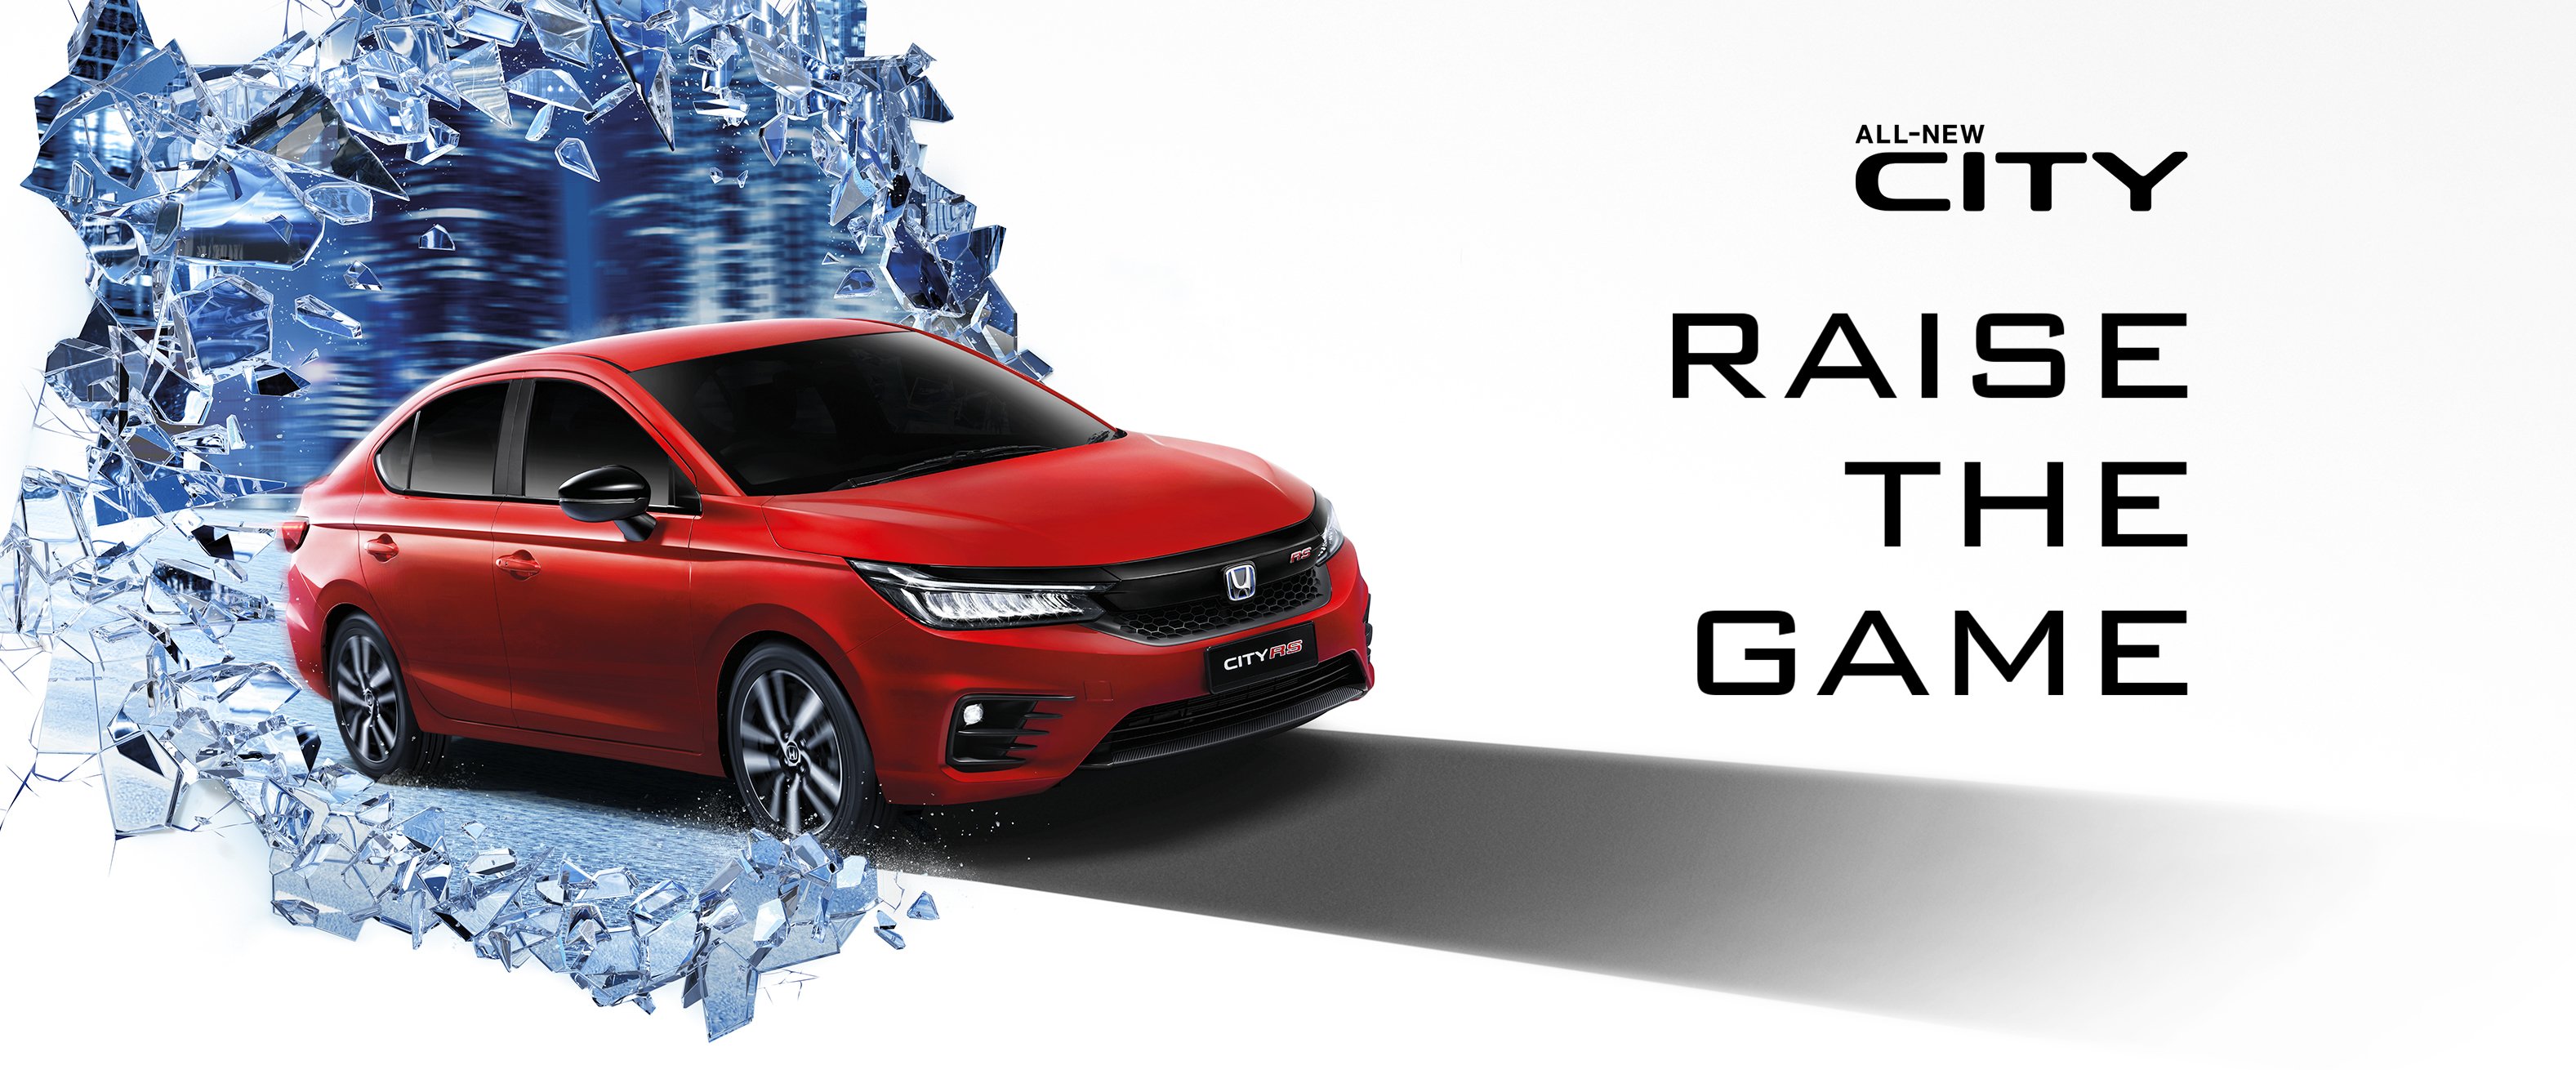 The All New Honda City - Raise the Game